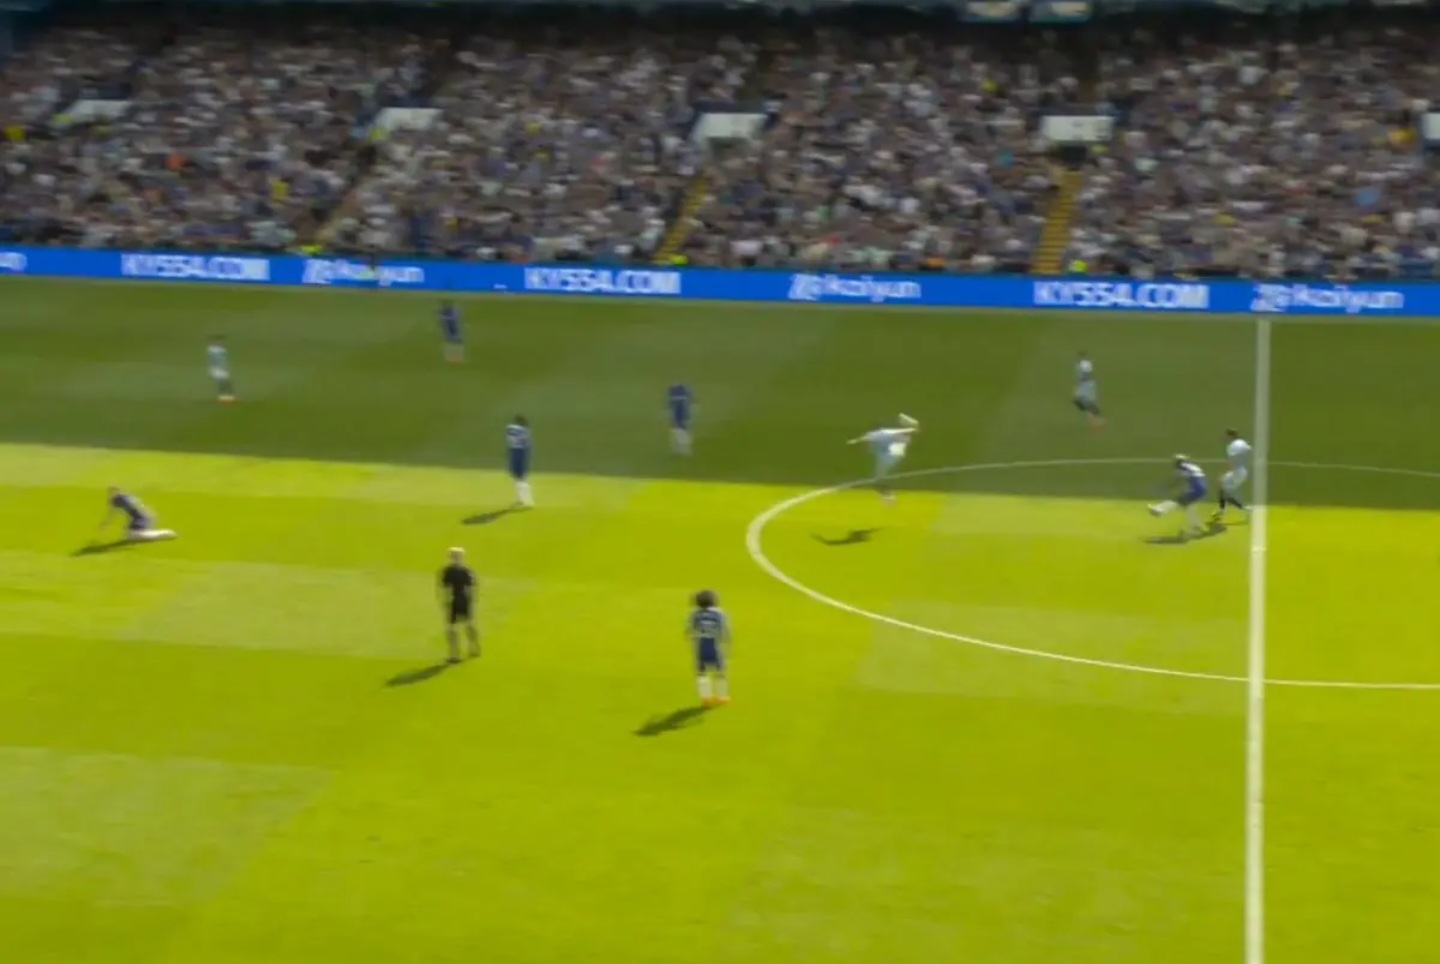 Chelsea take the lead after an incredible lob by Moises Caicedo from his own half